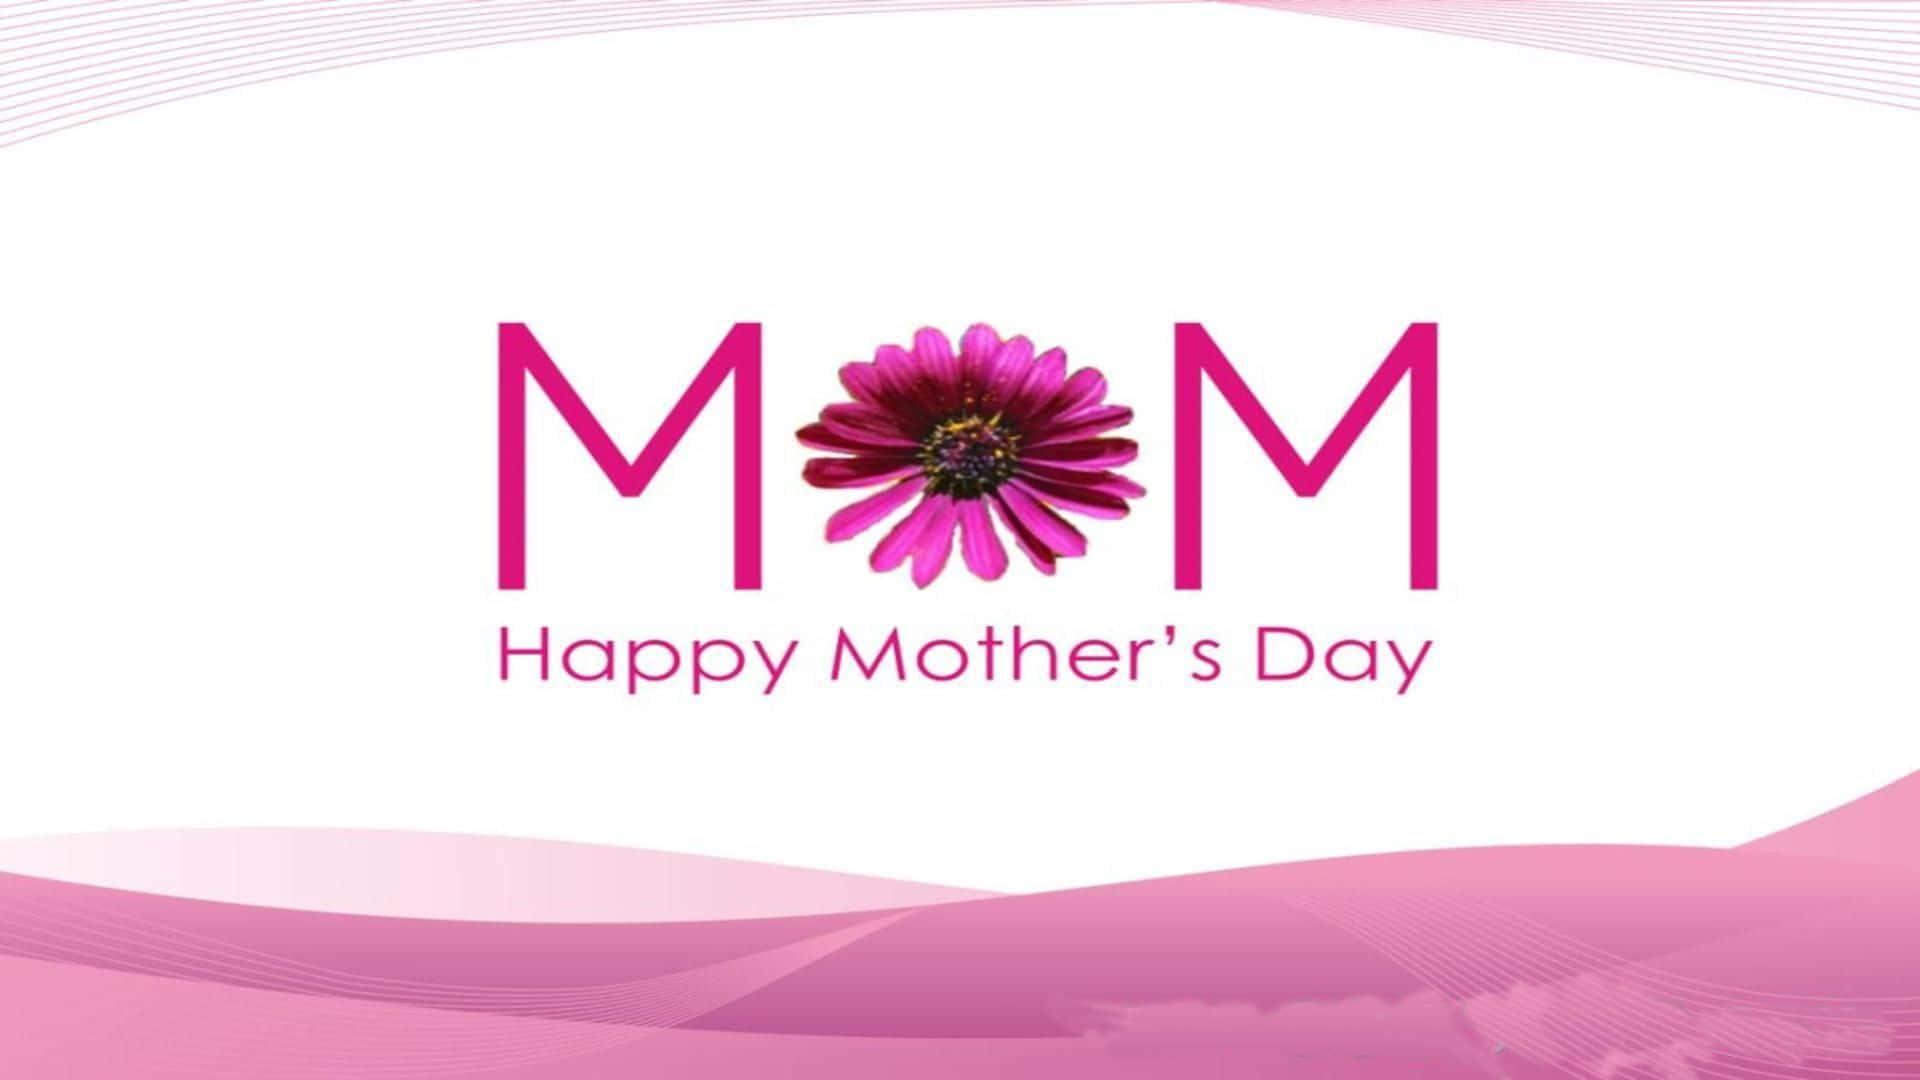 Celebrate Mother's Day with flowers, love and appreciation